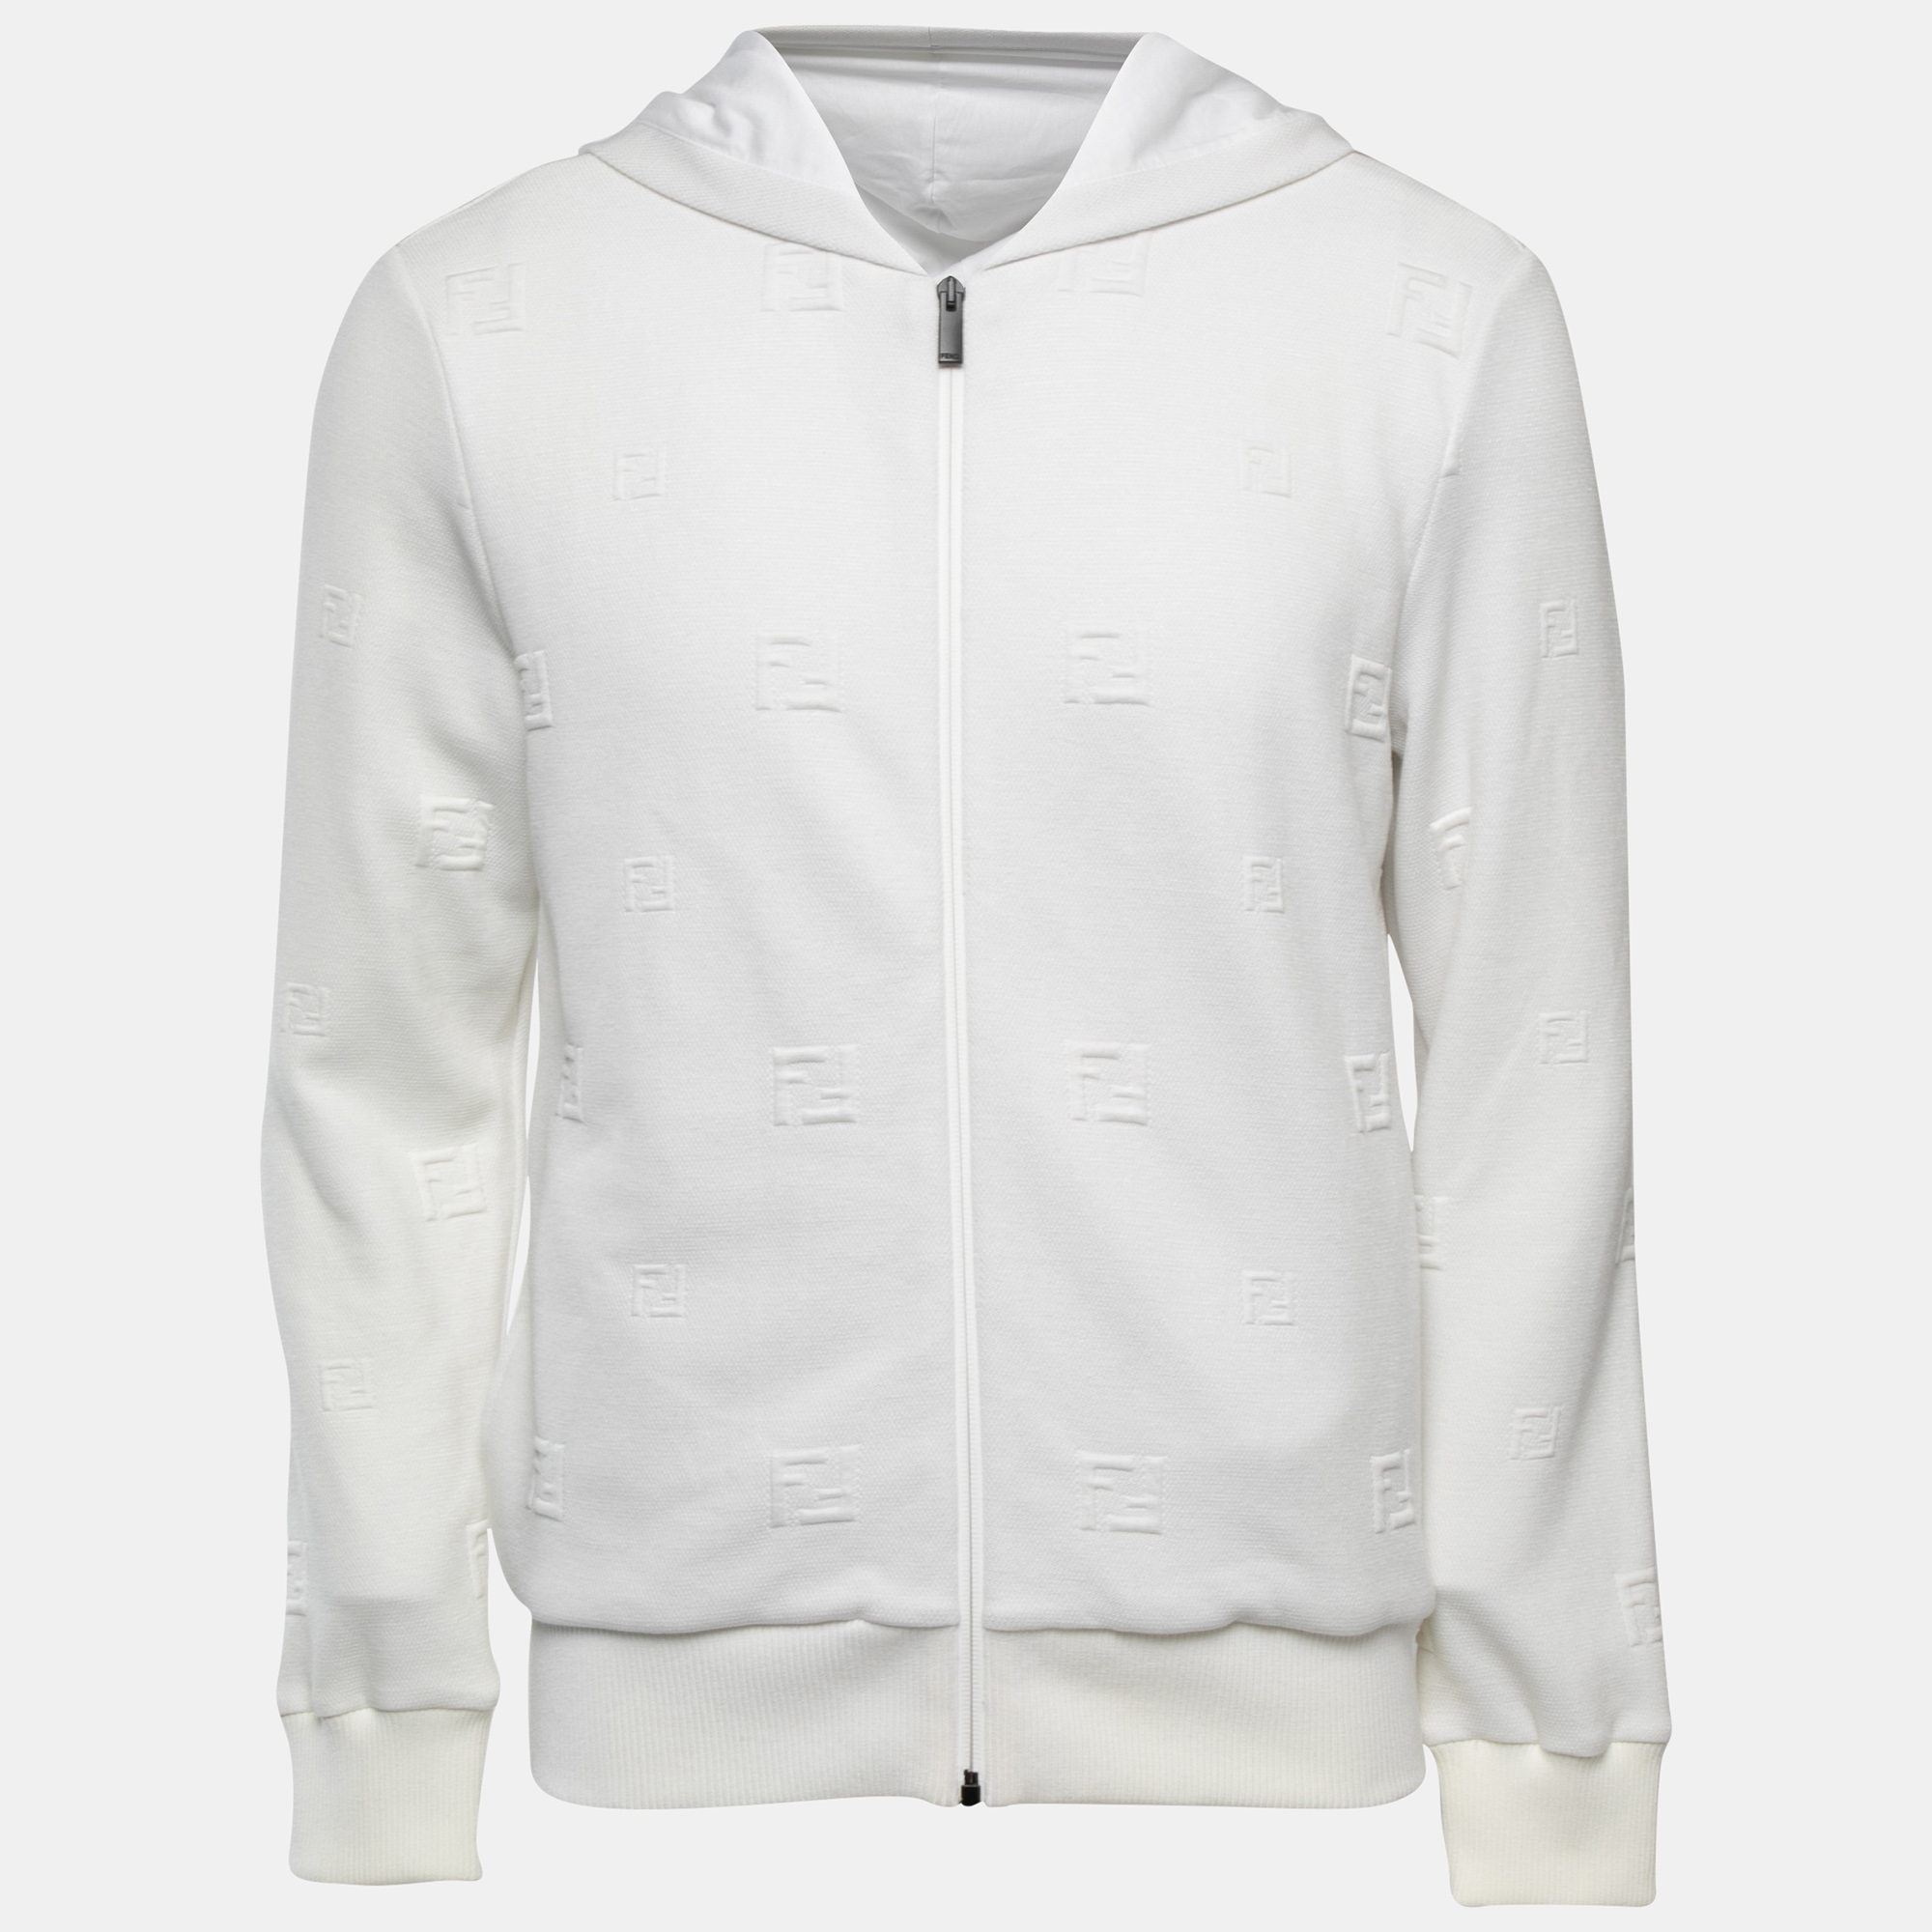 Fendi White FF Embroidered Jersey Knit Zip-Up Jacket S